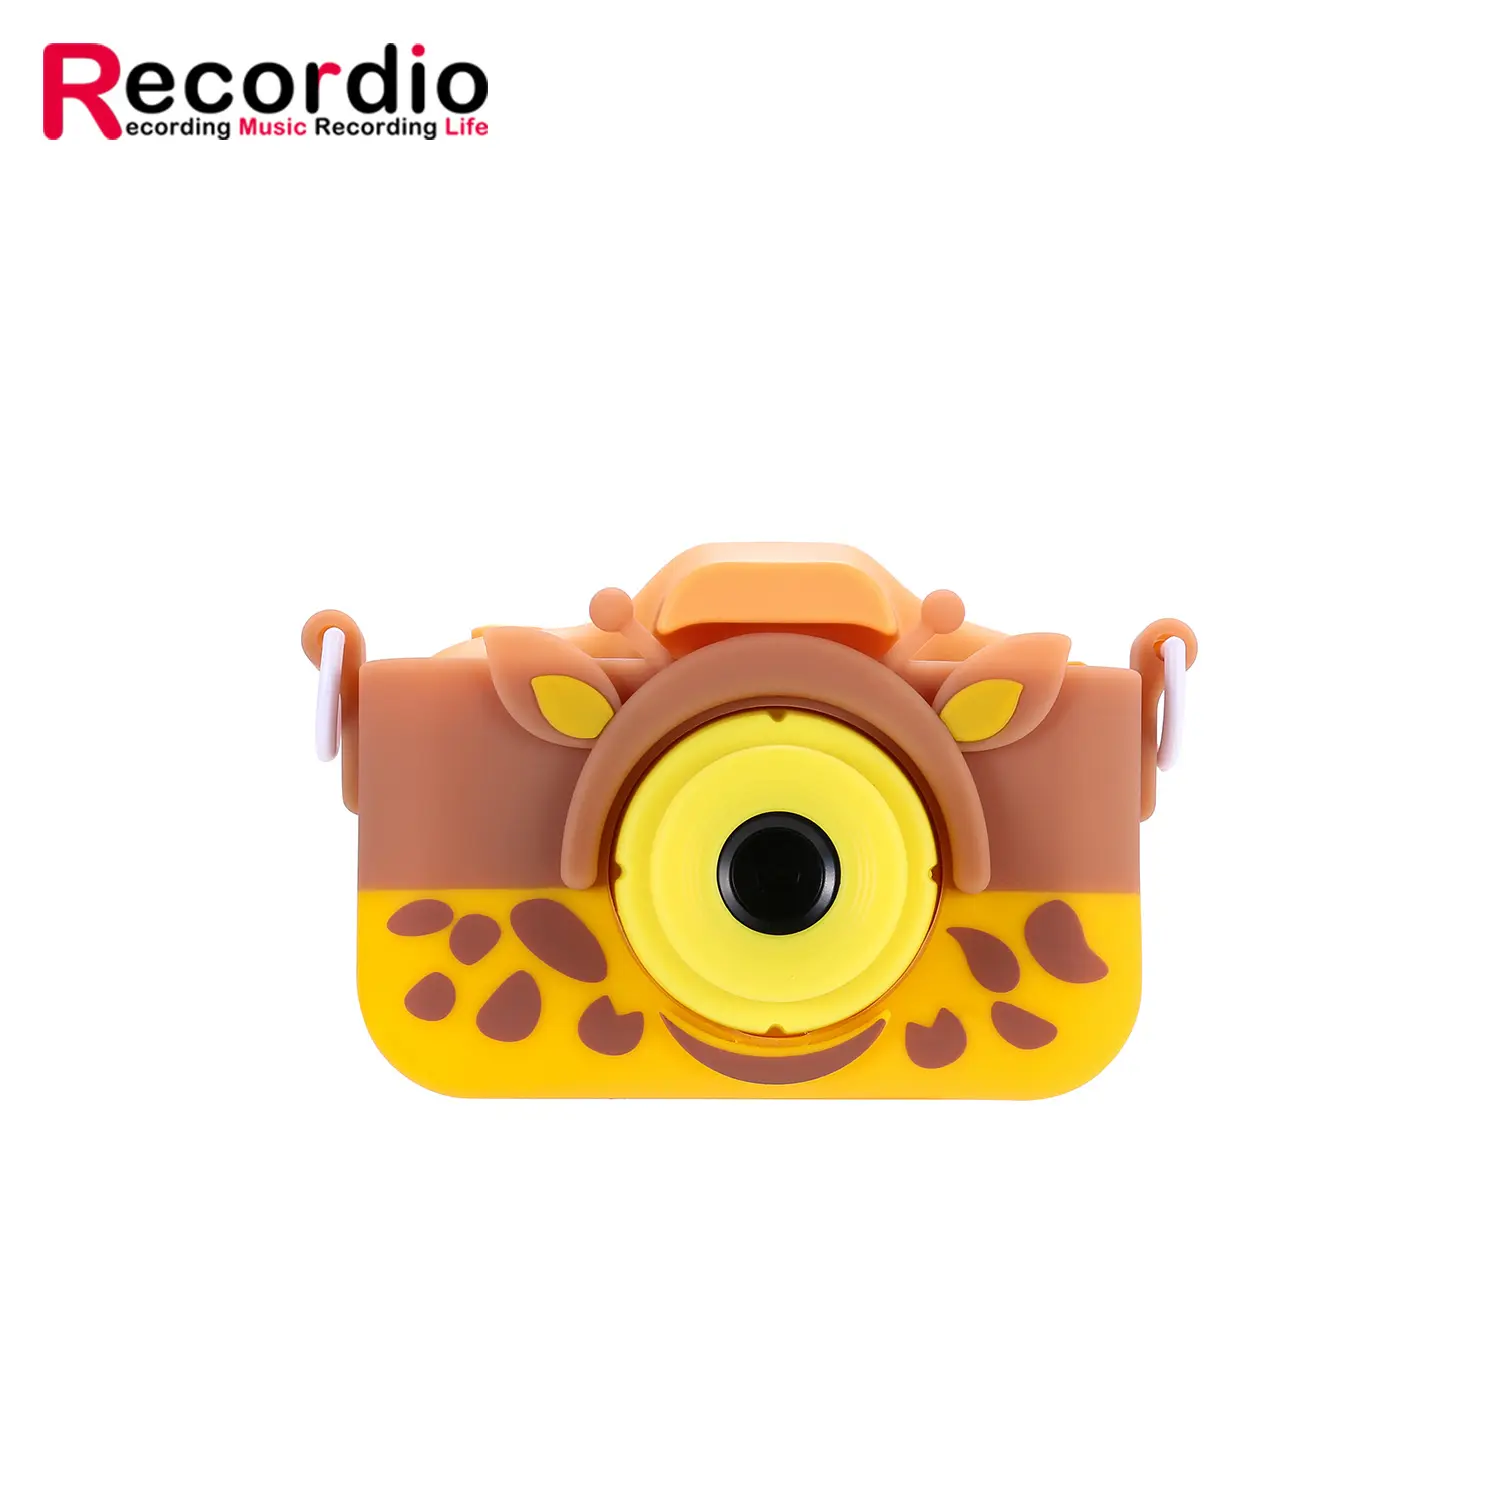 GAD-C03 Suitable For All Ages Toy Camera Safekeeping of All photos and Videos Captured By The Cartoon Design Kid's Camera